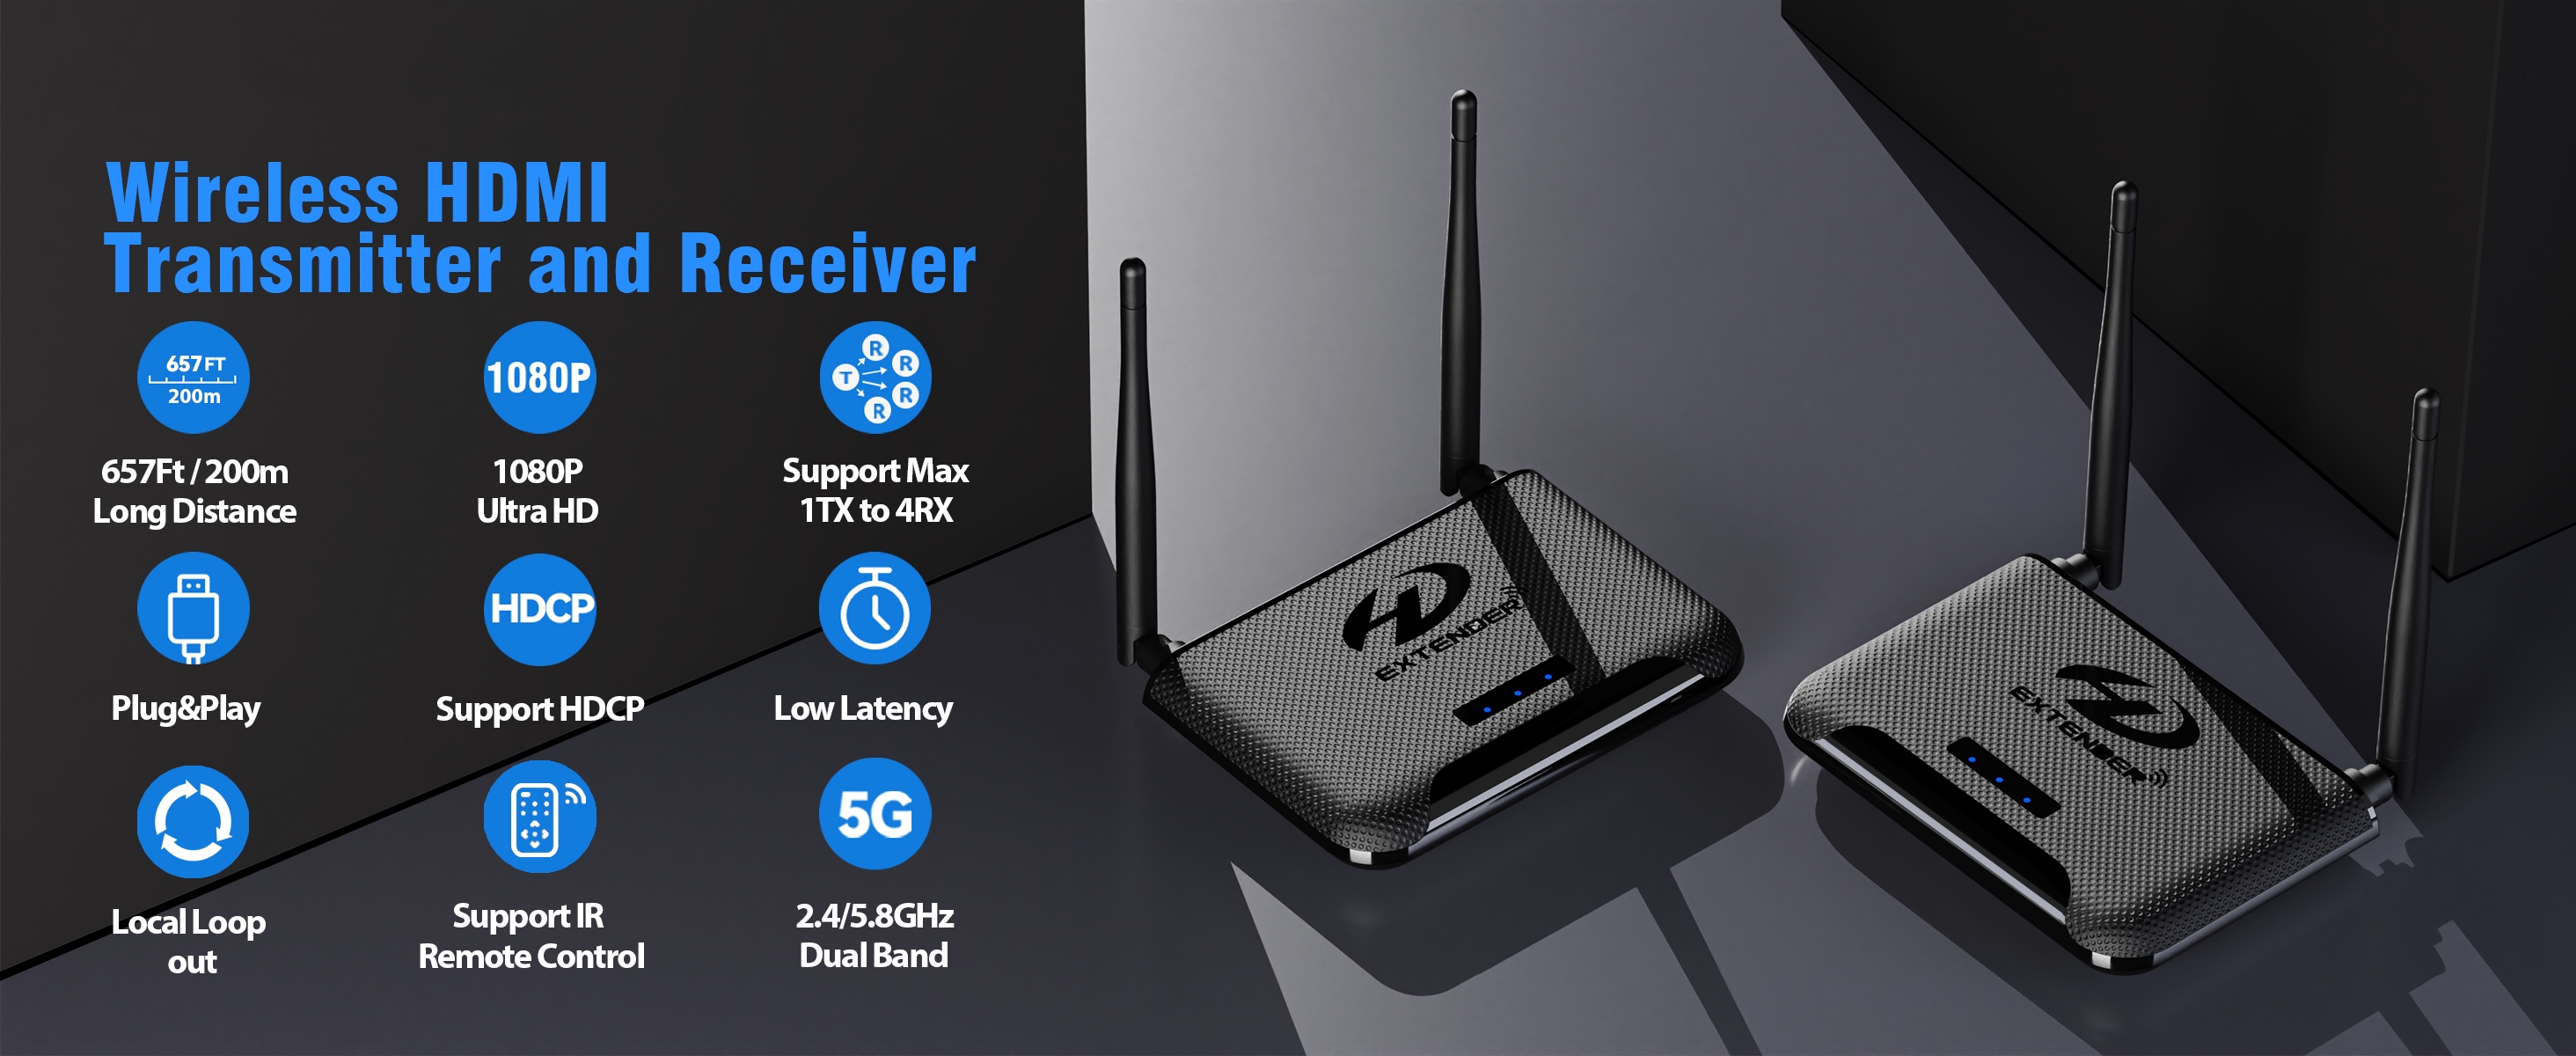 wireless hdmi transmitter and receiver